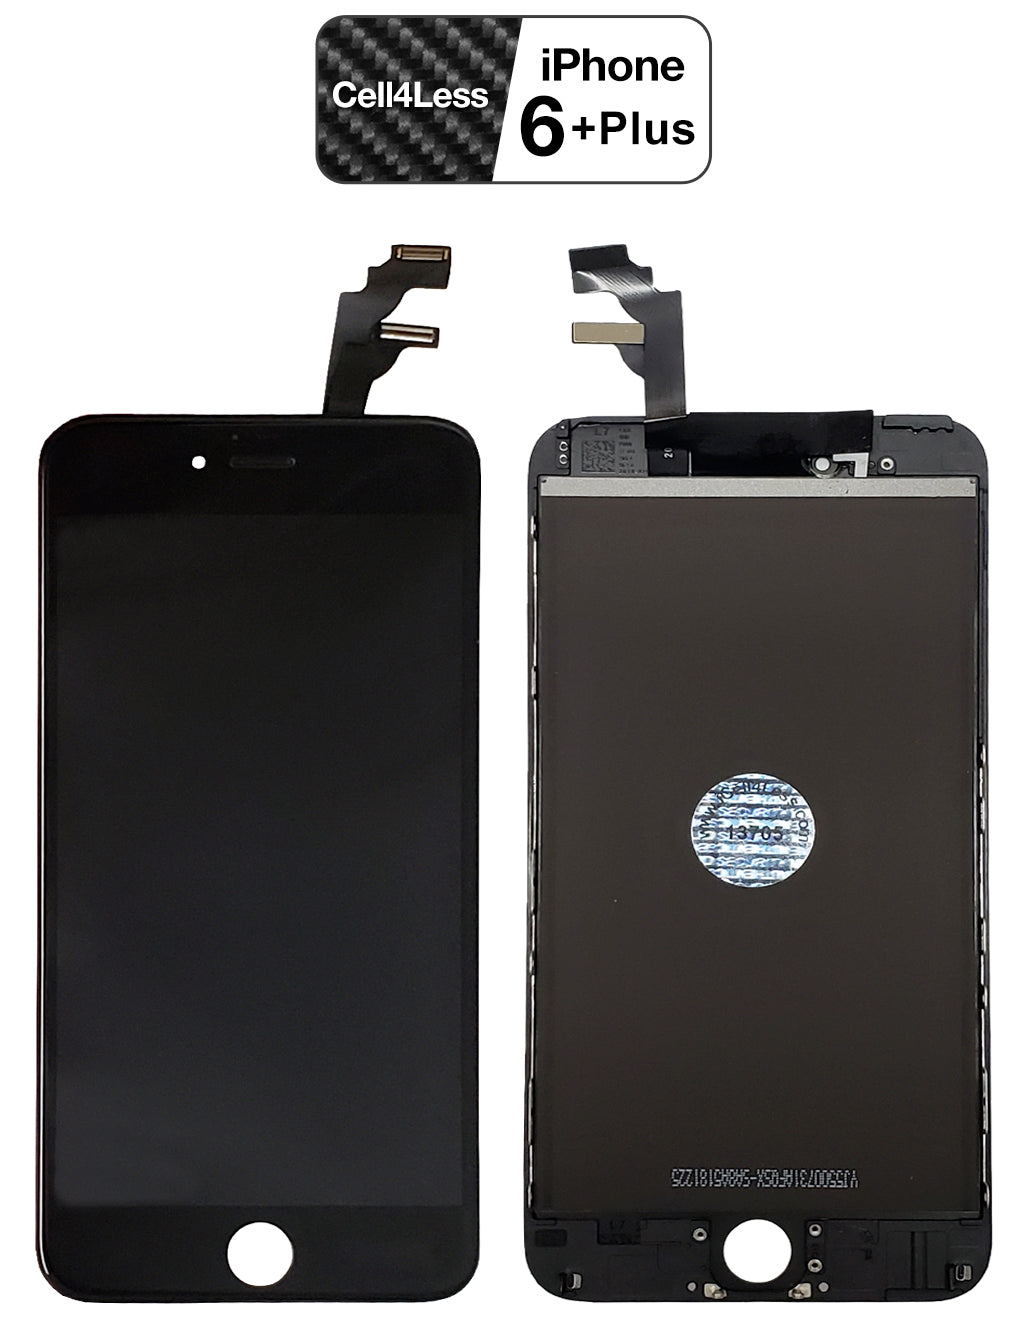 iPhone 6 Plus Replacement LCD Screen – Battery World